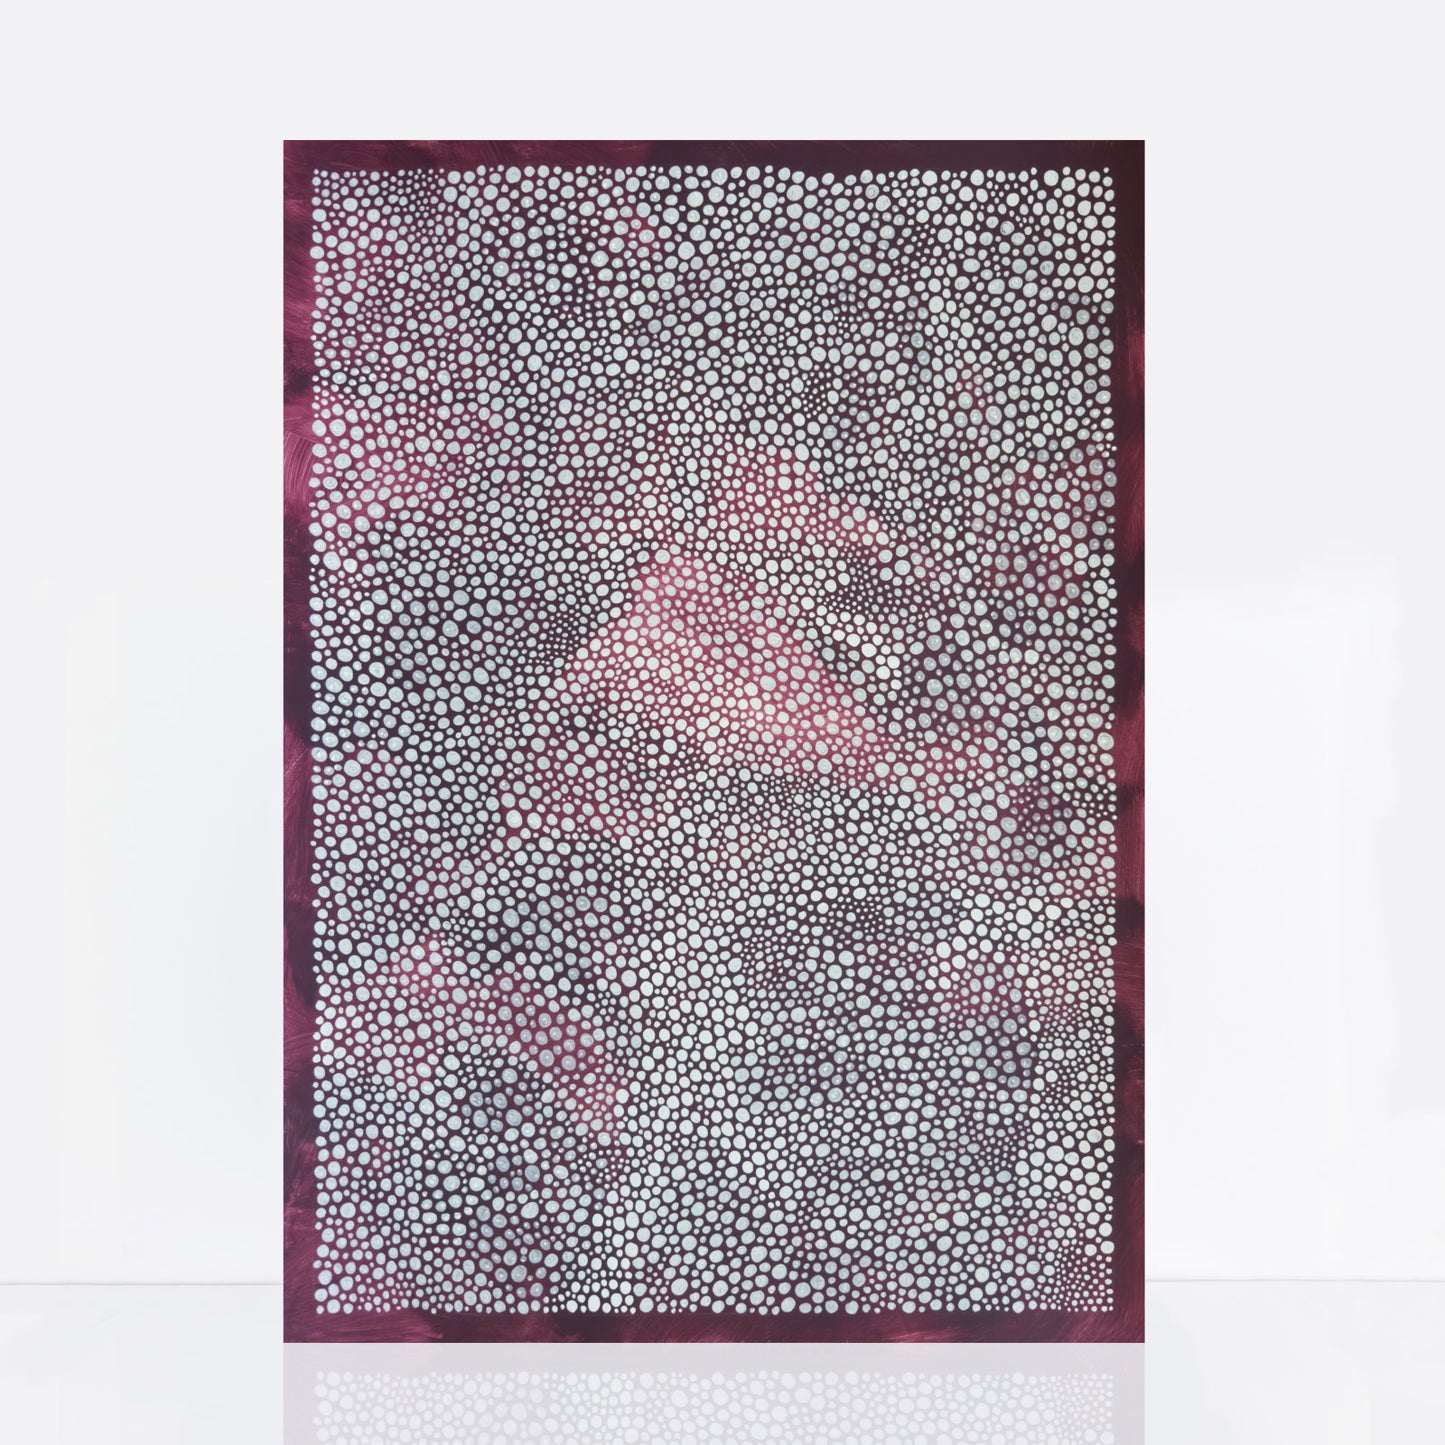 abstract artwork with plum background adorned with delicate white dots